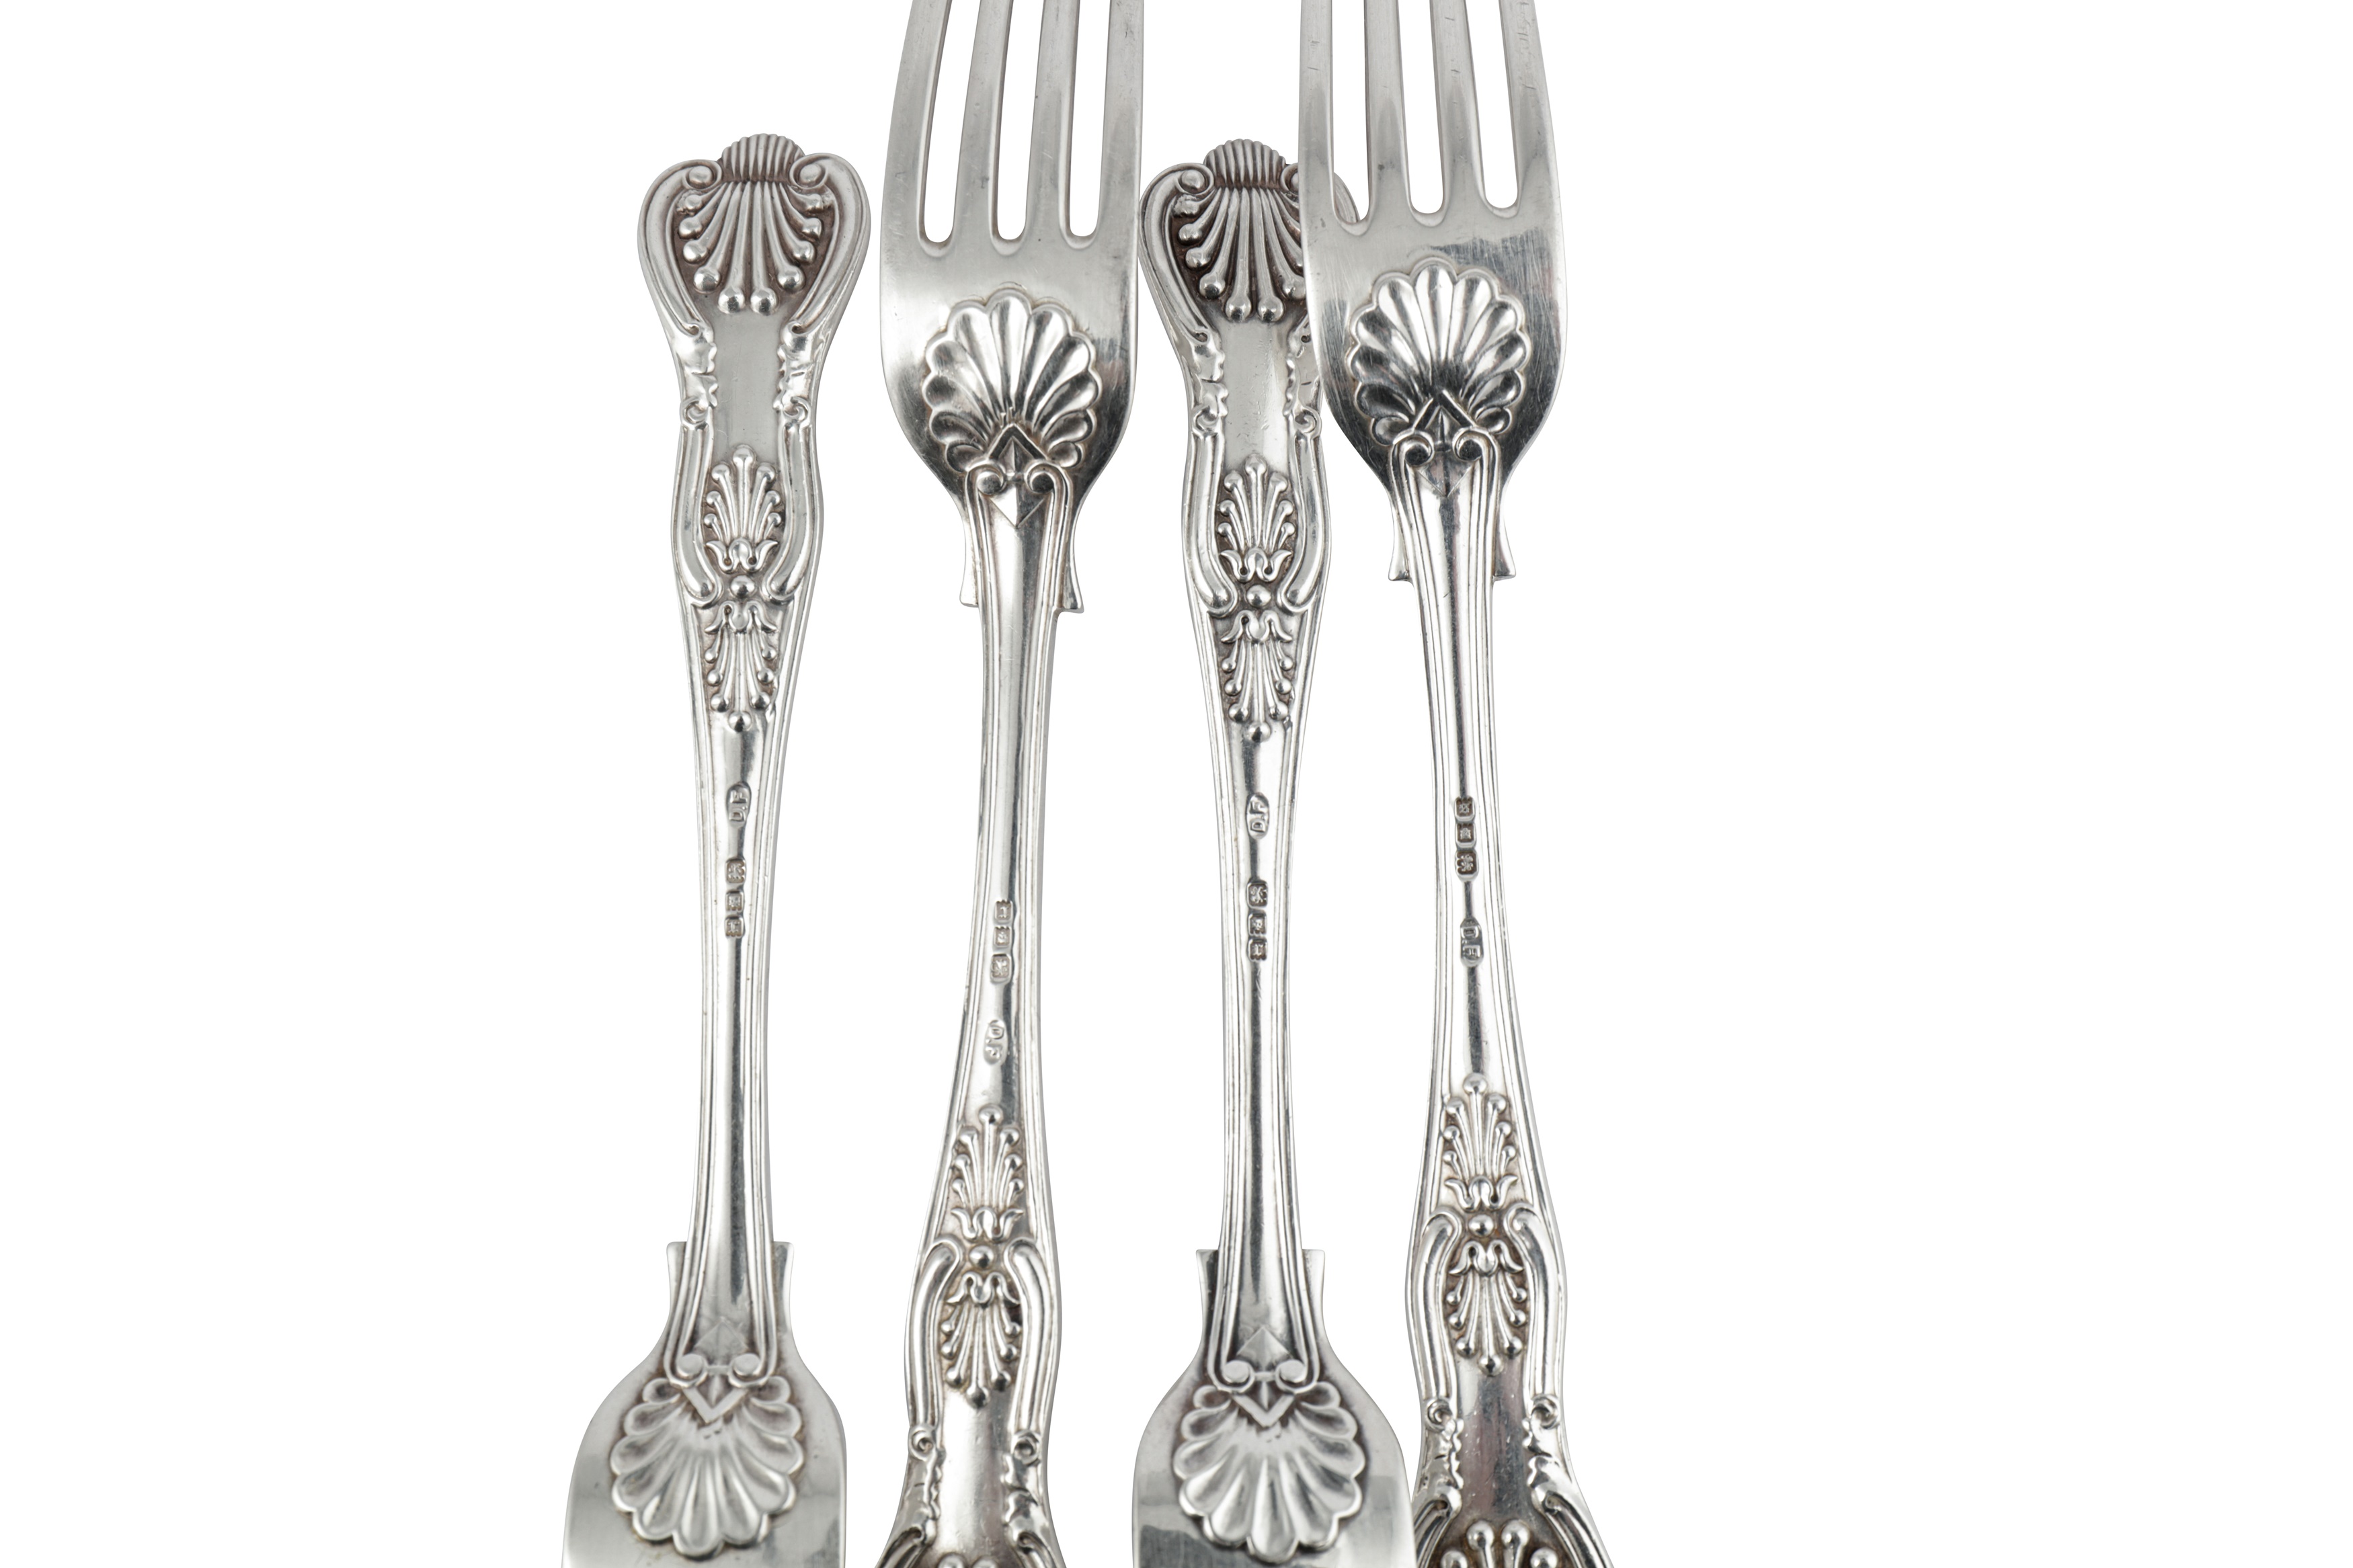 A set of ten George V sterling silver dessert forks, London 1932/33 by Josiah Williams & Co - Image 2 of 2